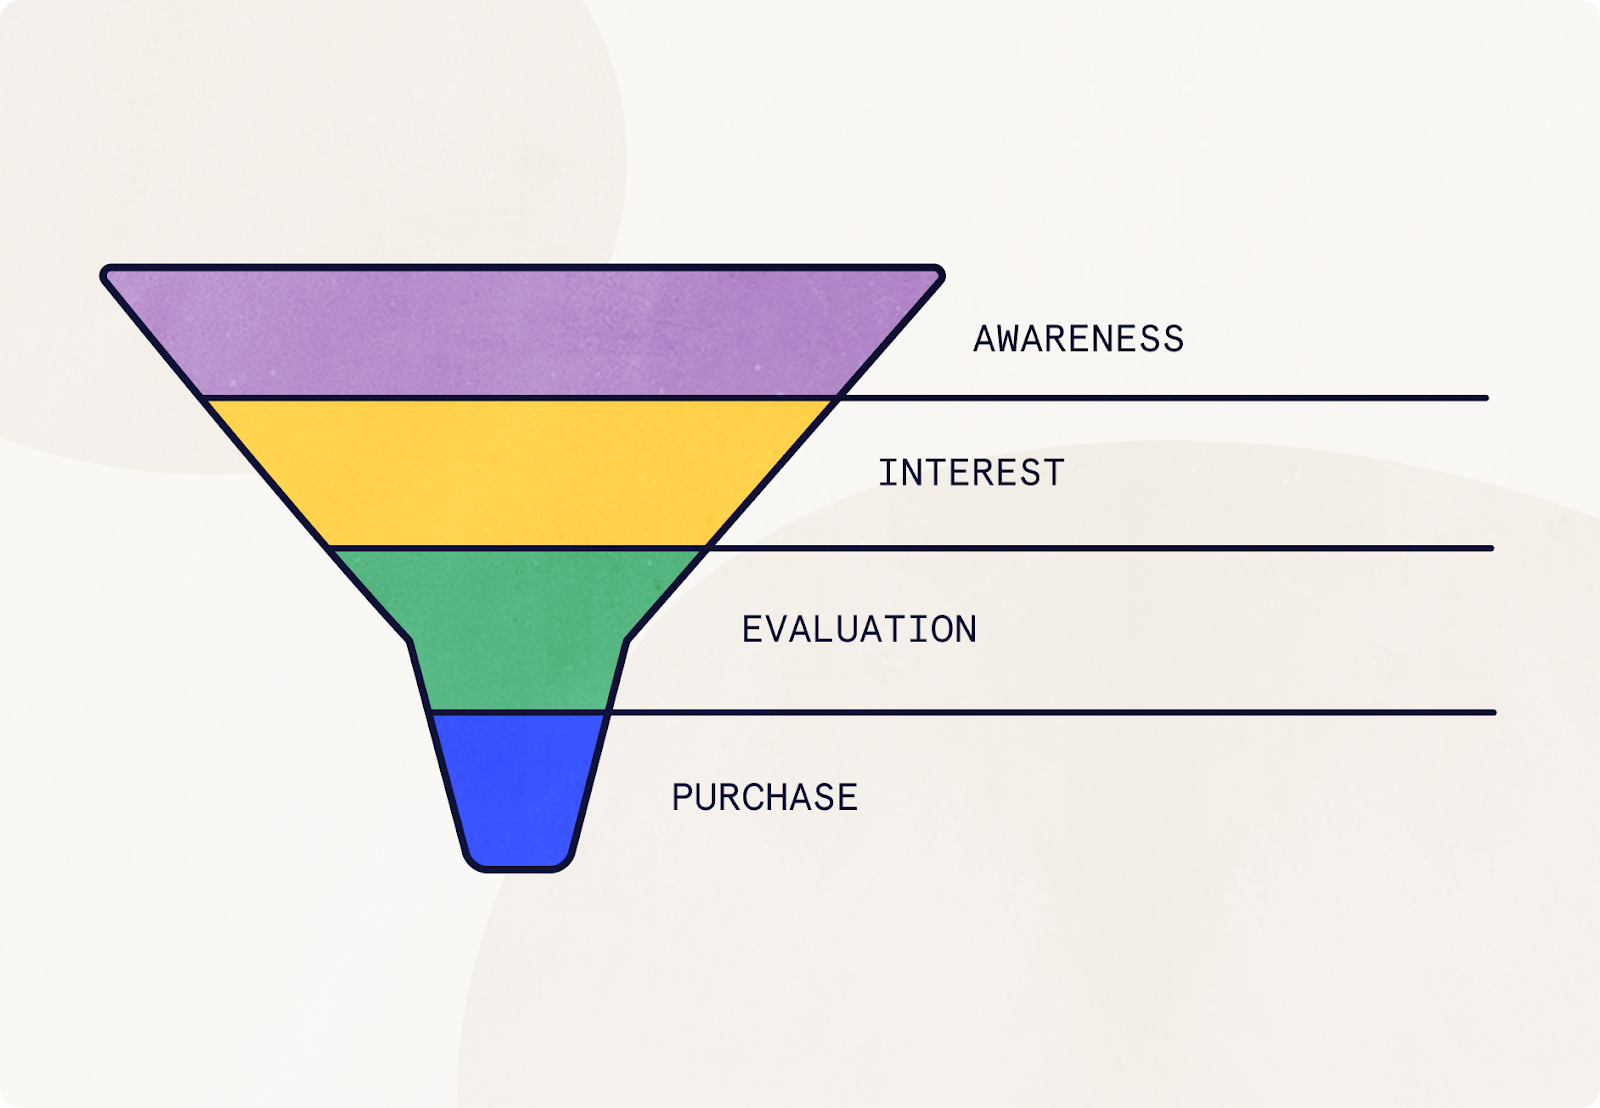 event marketing funnel illustration showing awareness, interest, evaluation, and purchase